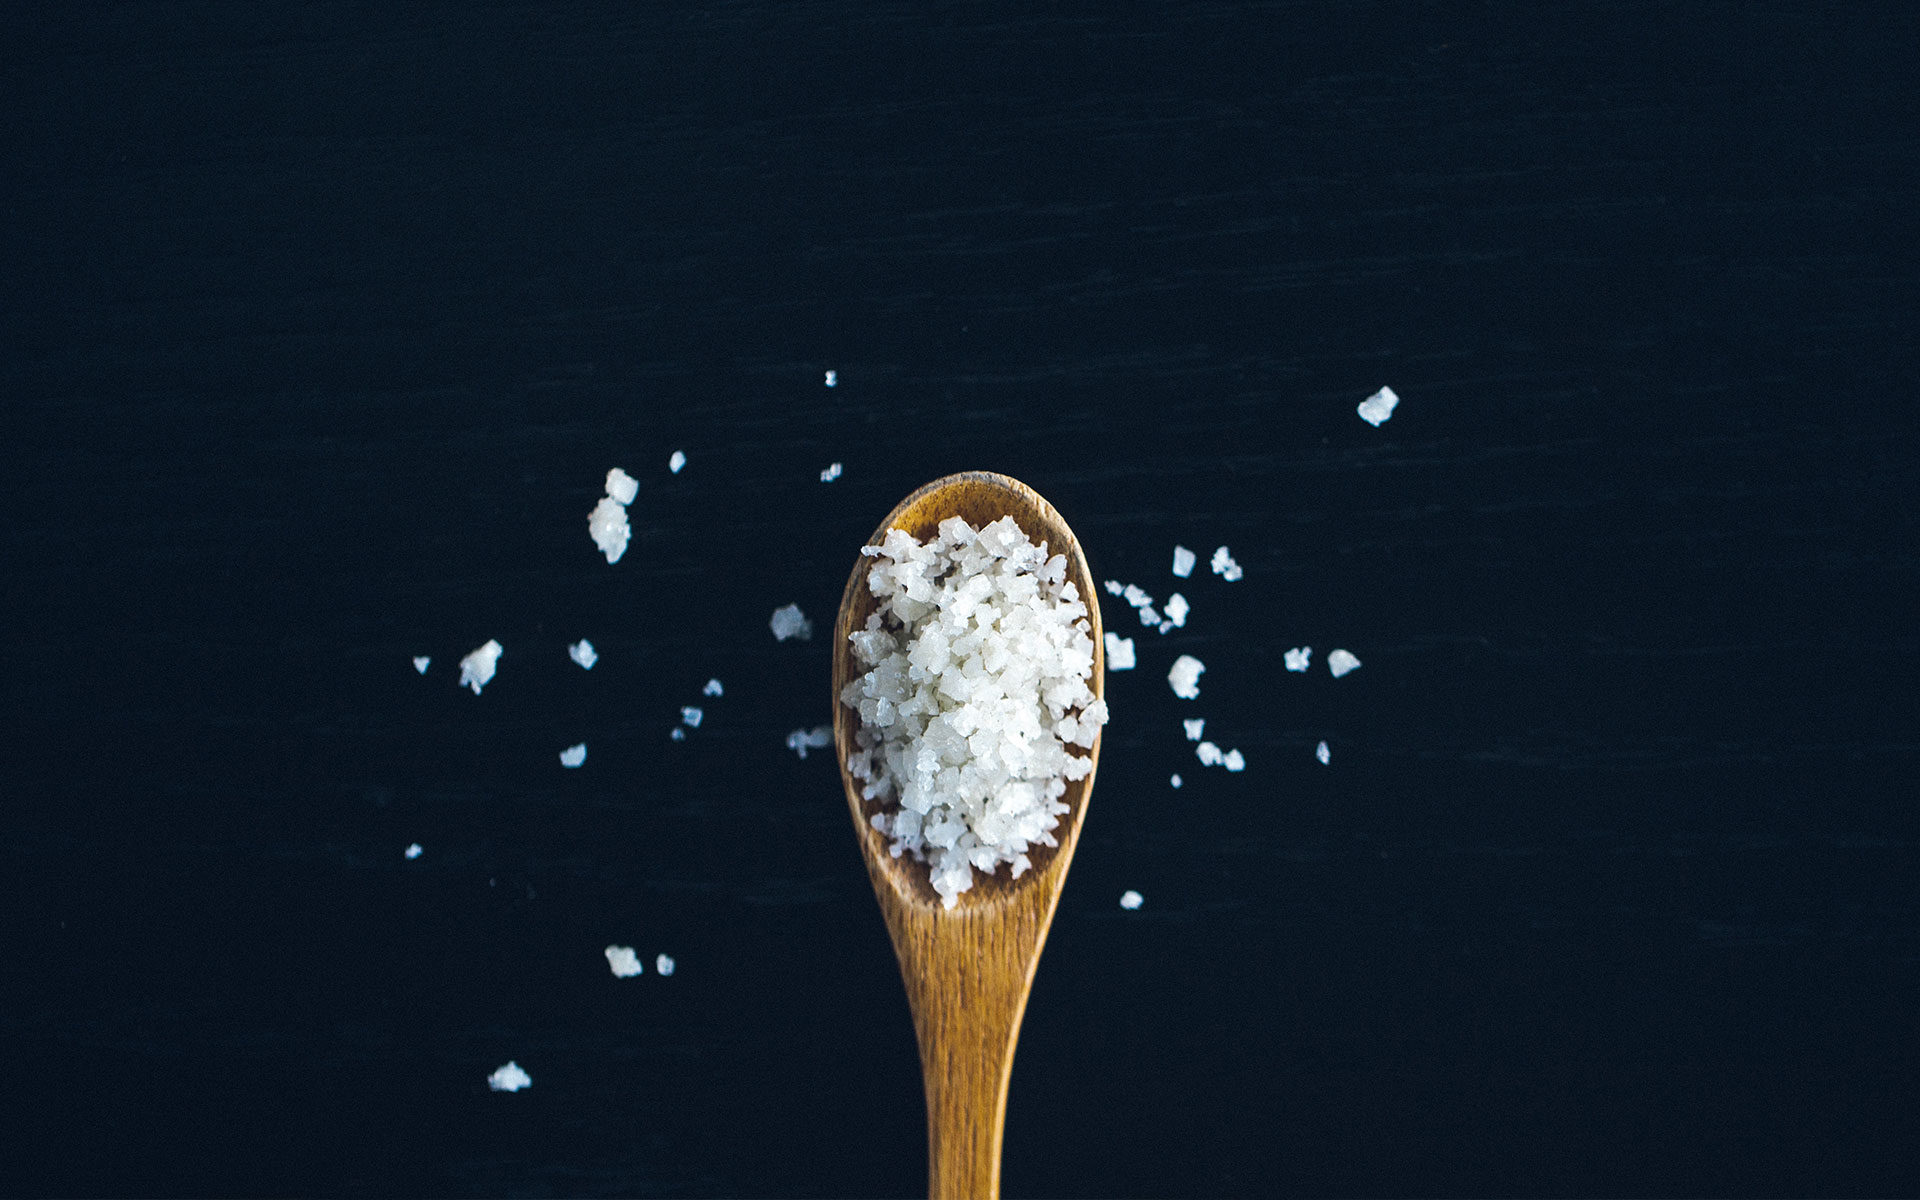 salt crystals on a wooden spoon